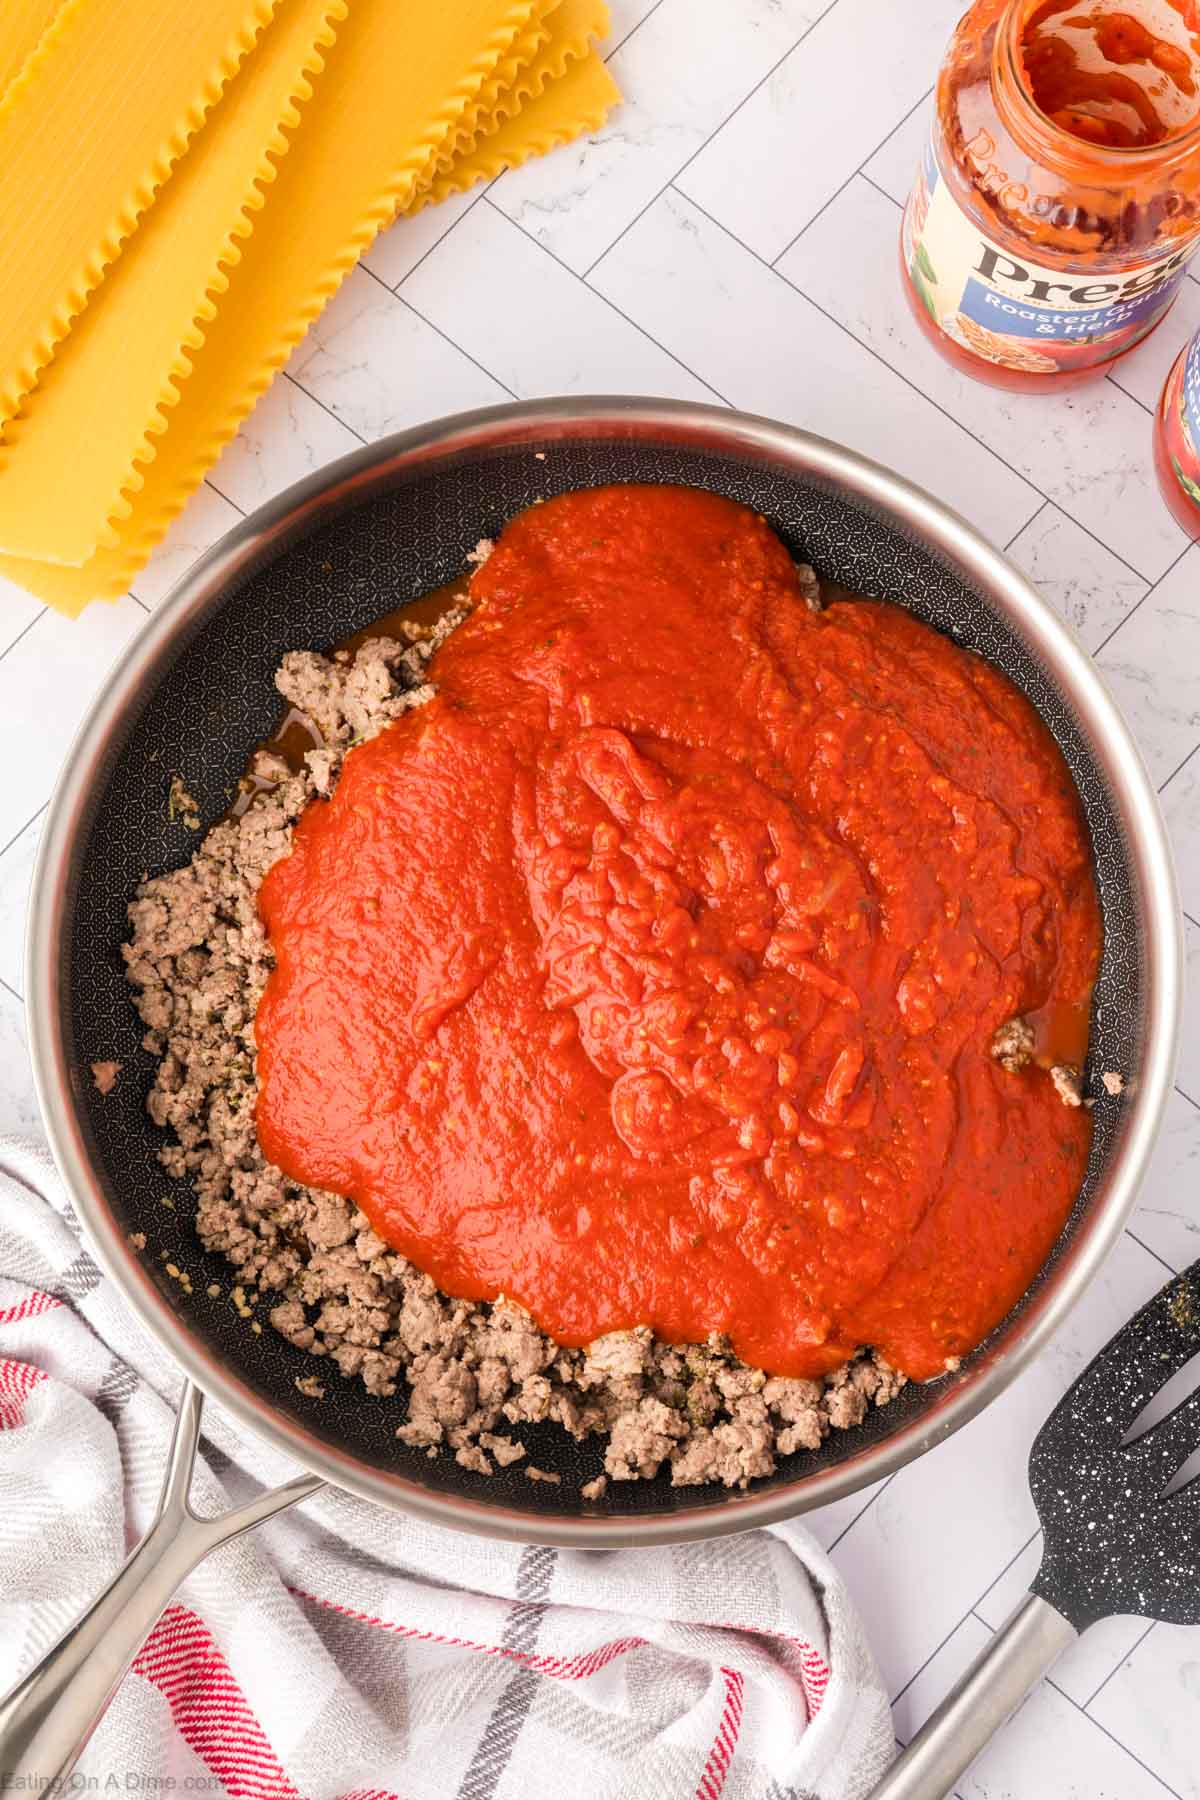 Pouring the sauce in the skillet with the cooked ground beef